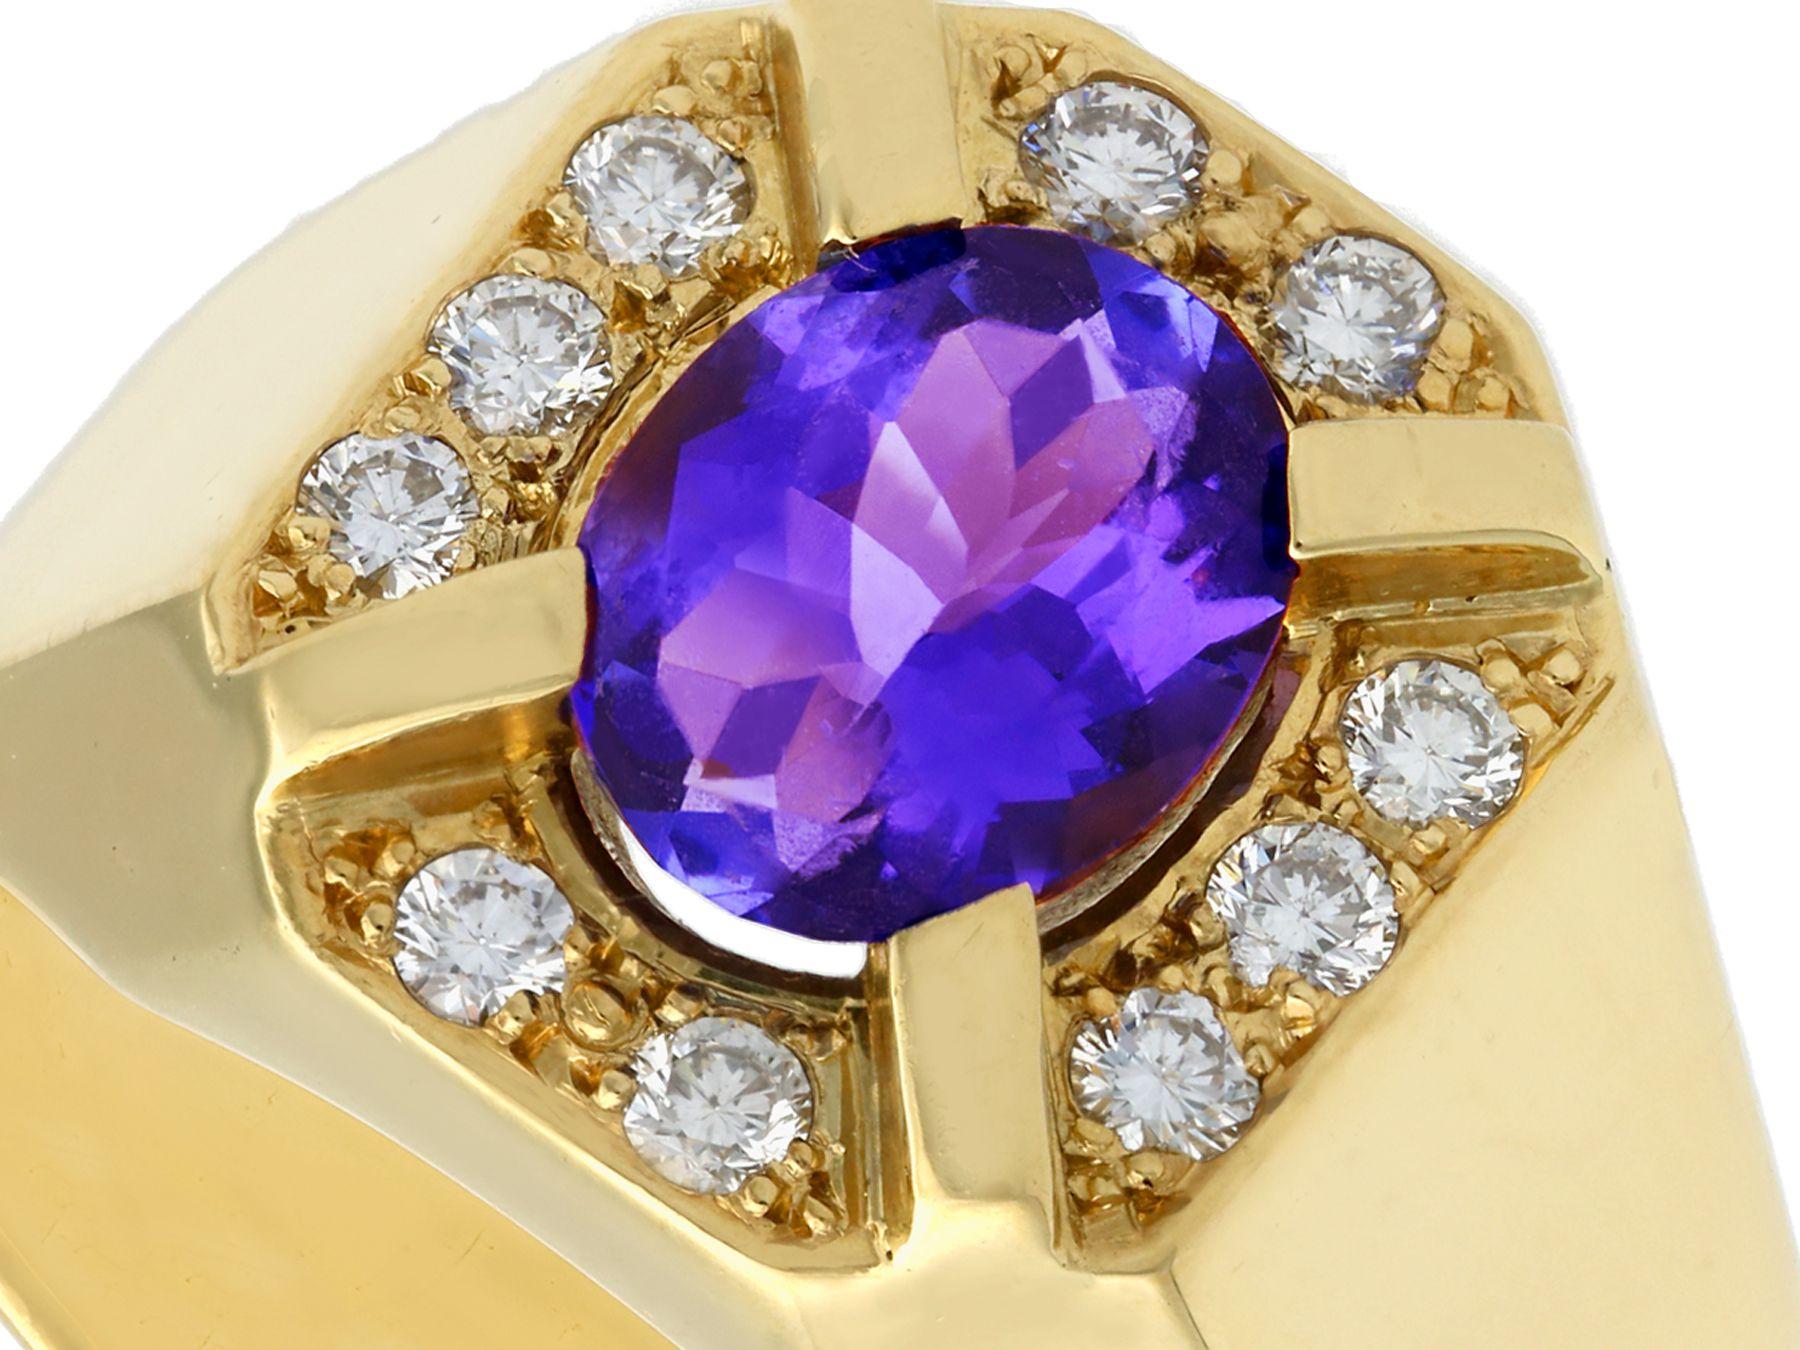 3.35 Carat Oval Cut Tanzanite and Diamond Yellow Gold Cocktail Ring In Excellent Condition For Sale In Jesmond, Newcastle Upon Tyne